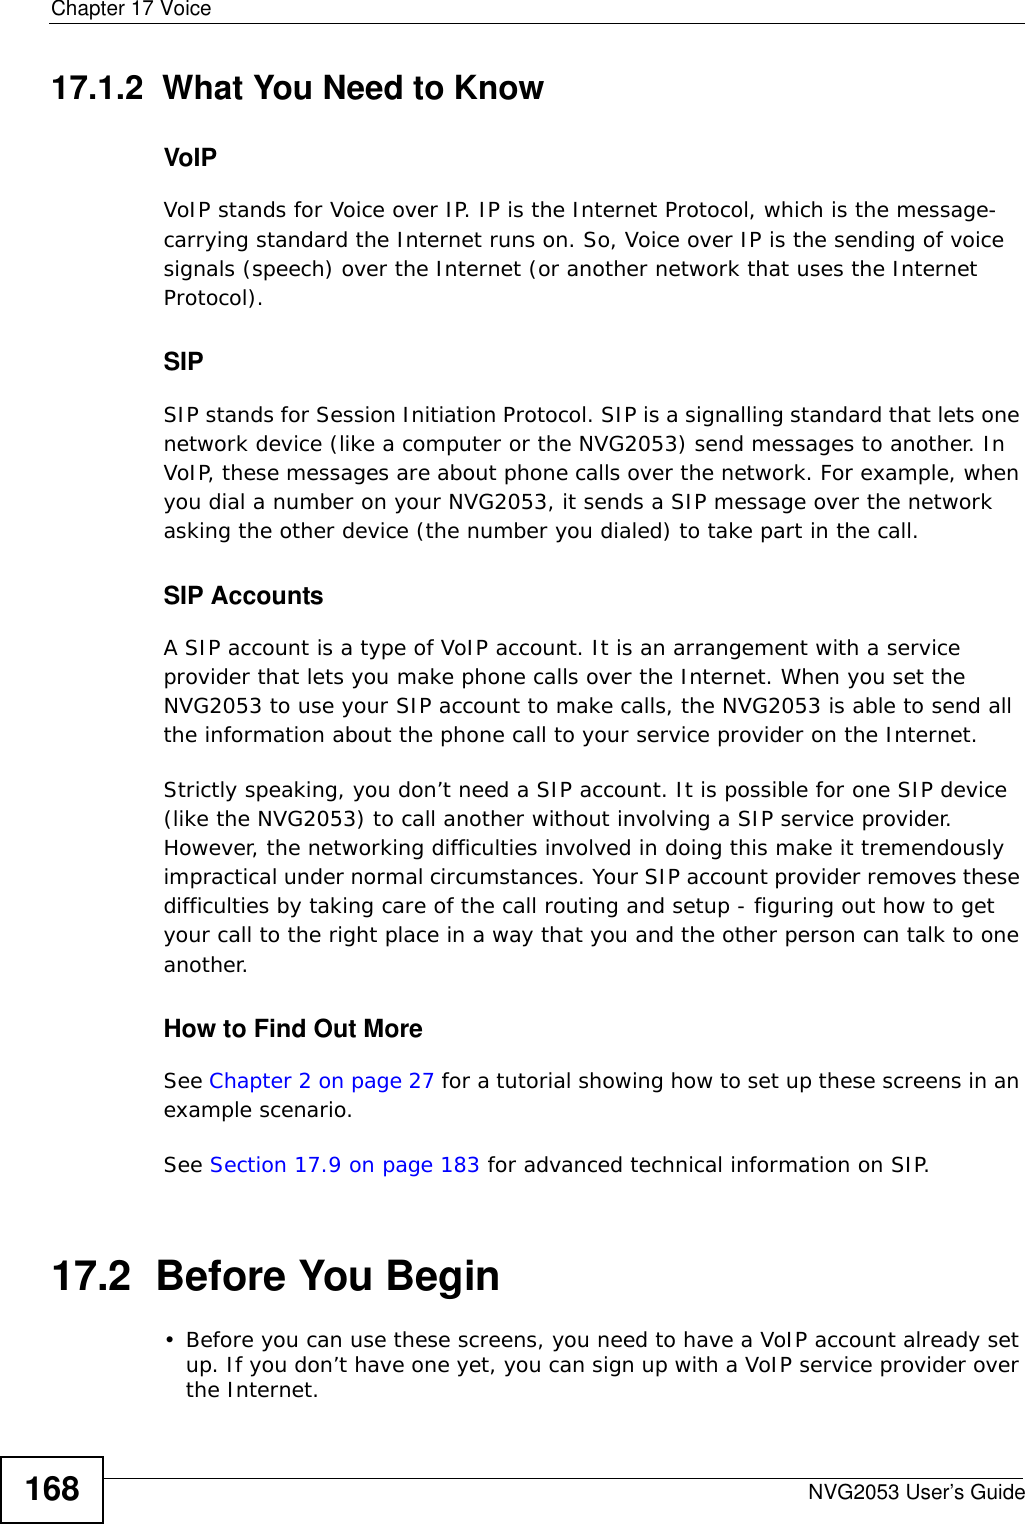 Chapter 17 VoiceNVG2053 User’s Guide16817.1.2  What You Need to KnowVoIPVoIP stands for Voice over IP. IP is the Internet Protocol, which is the message-carrying standard the Internet runs on. So, Voice over IP is the sending of voice signals (speech) over the Internet (or another network that uses the Internet Protocol).SIPSIP stands for Session Initiation Protocol. SIP is a signalling standard that lets one network device (like a computer or the NVG2053) send messages to another. In VoIP, these messages are about phone calls over the network. For example, when you dial a number on your NVG2053, it sends a SIP message over the network asking the other device (the number you dialed) to take part in the call. SIP AccountsA SIP account is a type of VoIP account. It is an arrangement with a service provider that lets you make phone calls over the Internet. When you set the NVG2053 to use your SIP account to make calls, the NVG2053 is able to send all the information about the phone call to your service provider on the Internet.Strictly speaking, you don’t need a SIP account. It is possible for one SIP device (like the NVG2053) to call another without involving a SIP service provider. However, the networking difficulties involved in doing this make it tremendously impractical under normal circumstances. Your SIP account provider removes these difficulties by taking care of the call routing and setup - figuring out how to get your call to the right place in a way that you and the other person can talk to one another. How to Find Out MoreSee Chapter 2 on page 27 for a tutorial showing how to set up these screens in an example scenario.See Section 17.9 on page 183 for advanced technical information on SIP.17.2  Before You Begin• Before you can use these screens, you need to have a VoIP account already set up. If you don’t have one yet, you can sign up with a VoIP service provider over the Internet. 